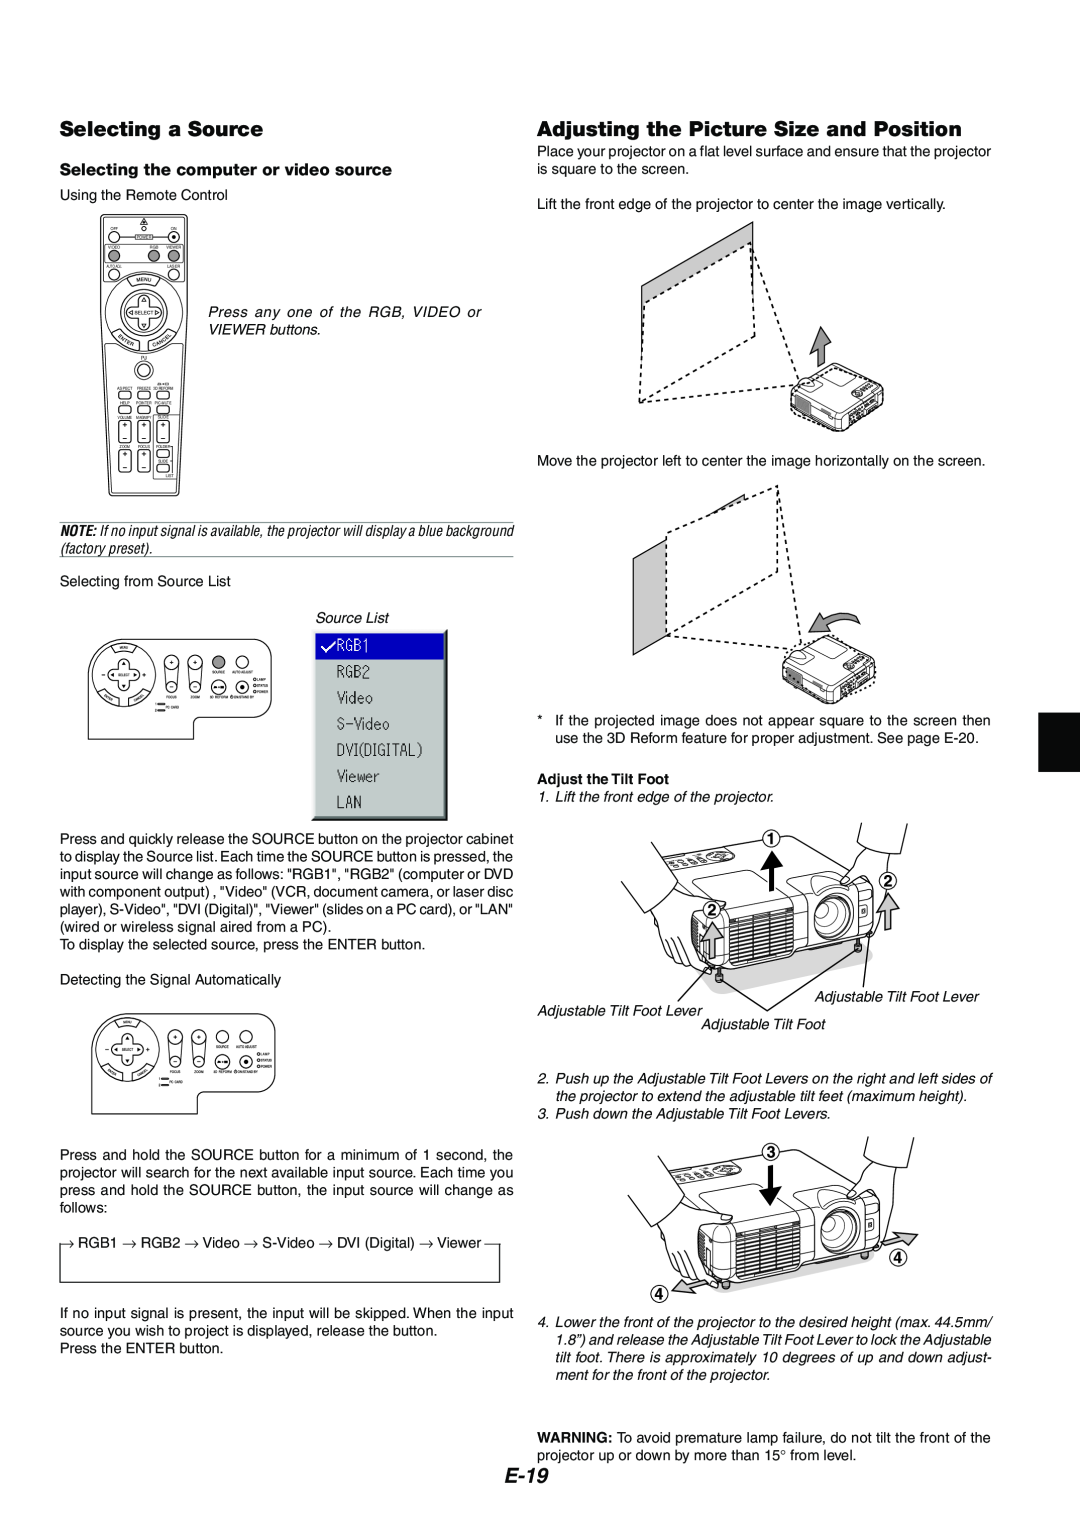 NEC MT1065/MT1060 user manual Selecting a Source, Adjusting the Picture Size and Position, E-19, Adjust the Tilt Foot 